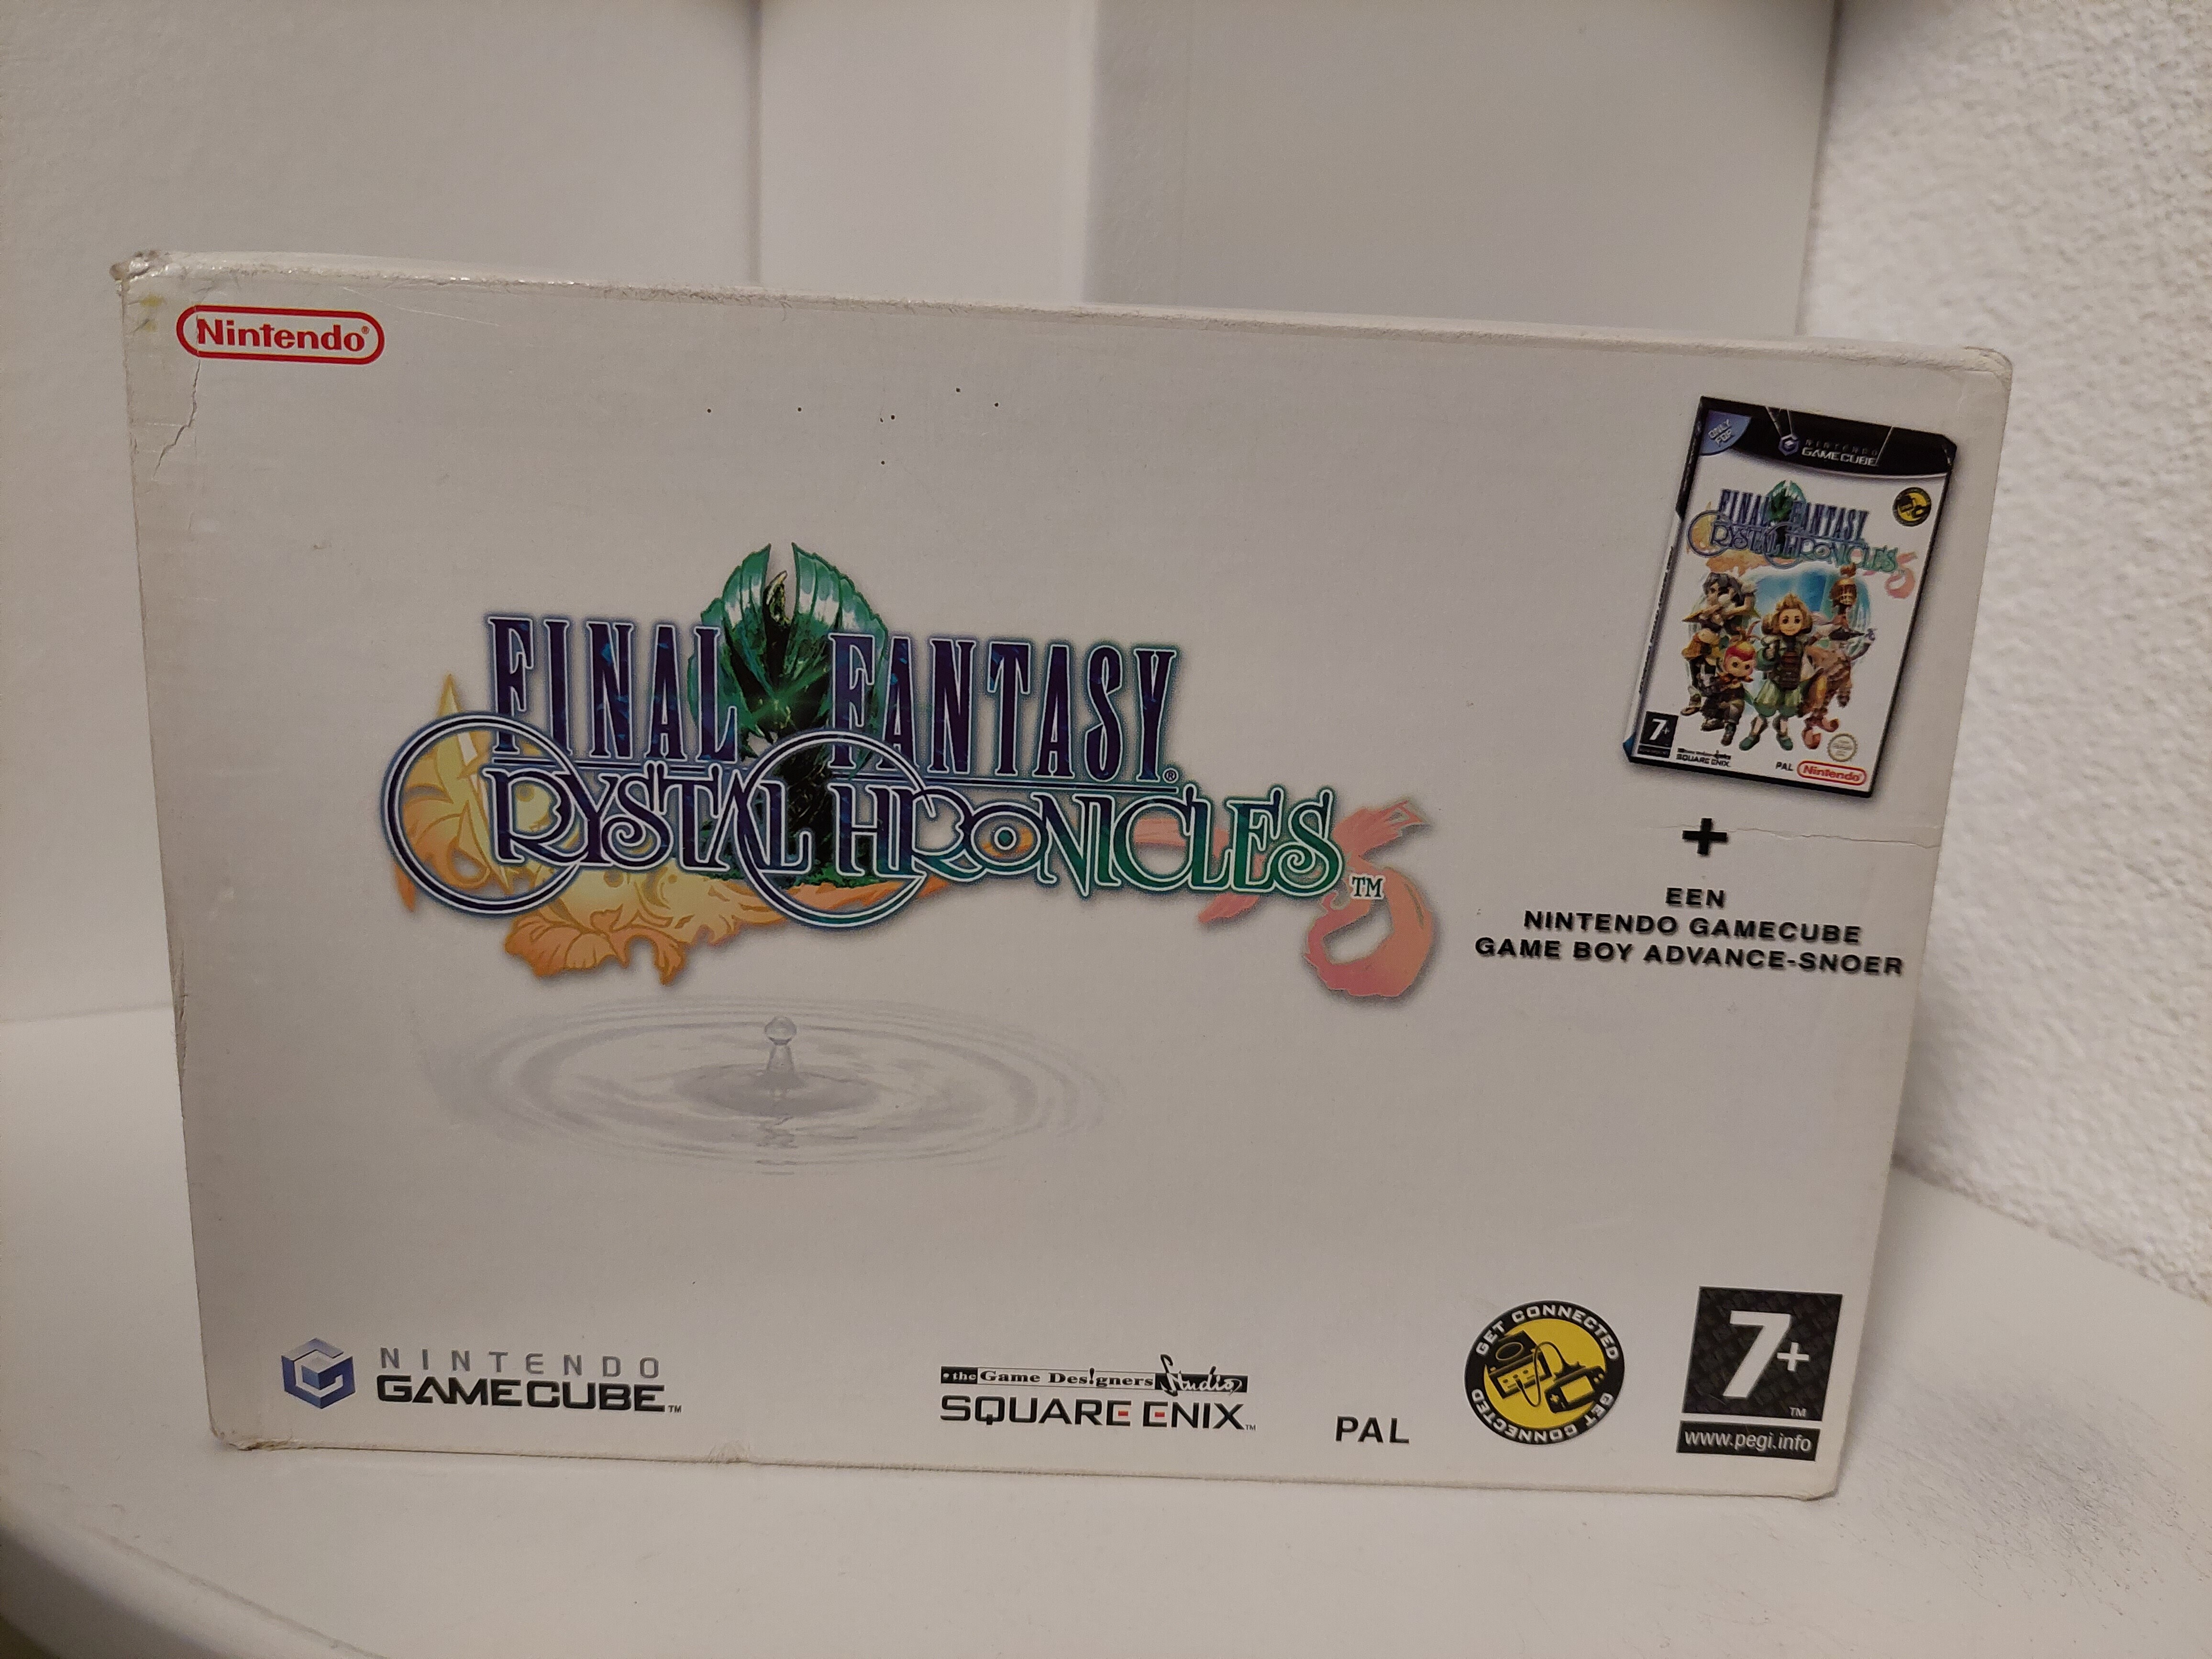  Nintendo GameCube Final Fantasy Chronicles GBA Link Cable Bundle